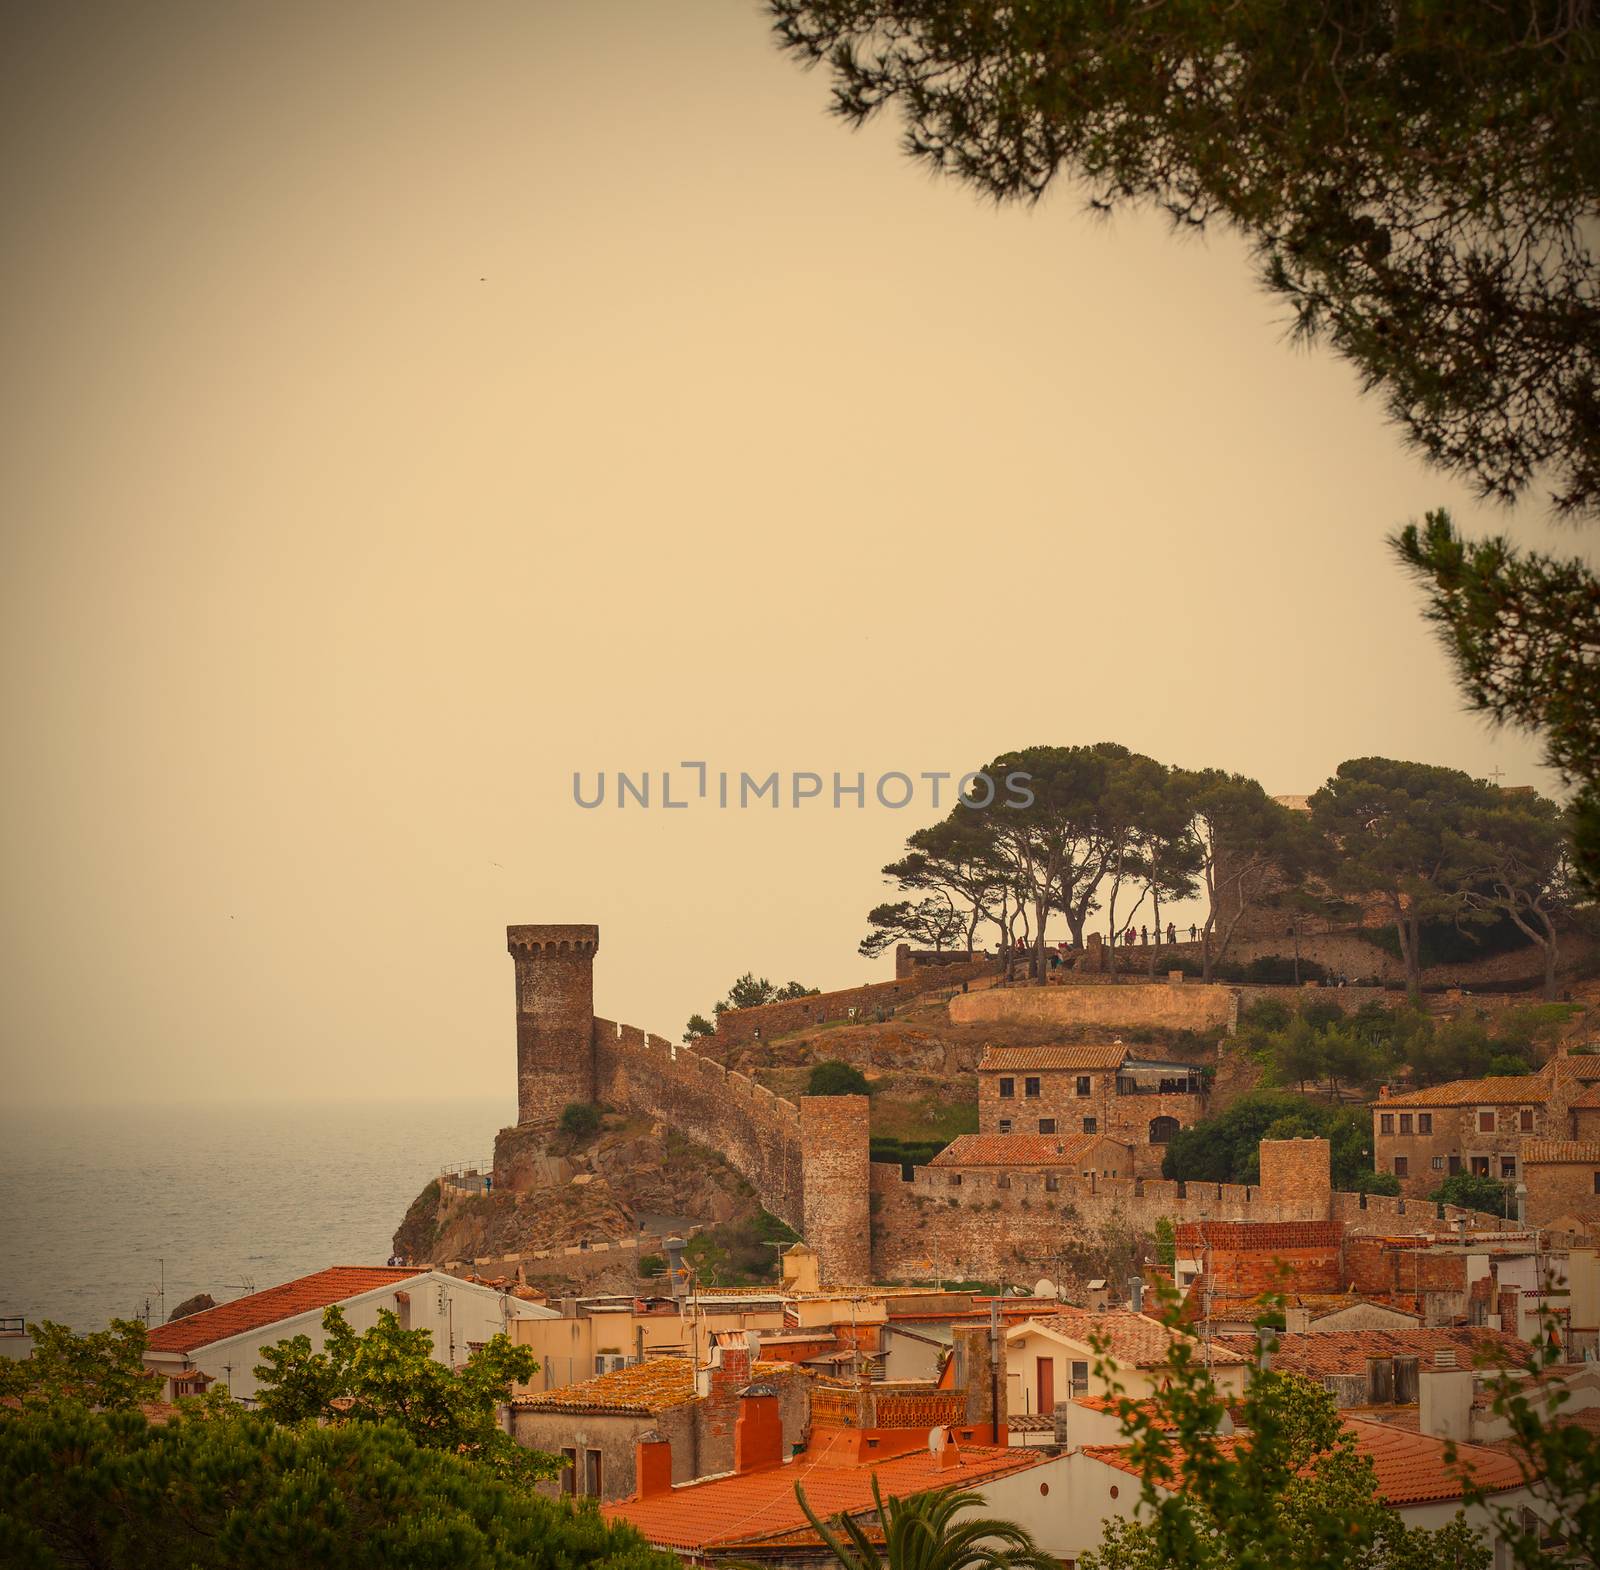 Tossa de Mar, Catalonia, Spain, 18.06.2013, views of the medieval fortress Vila Vella, editorial use only. Instagram style image